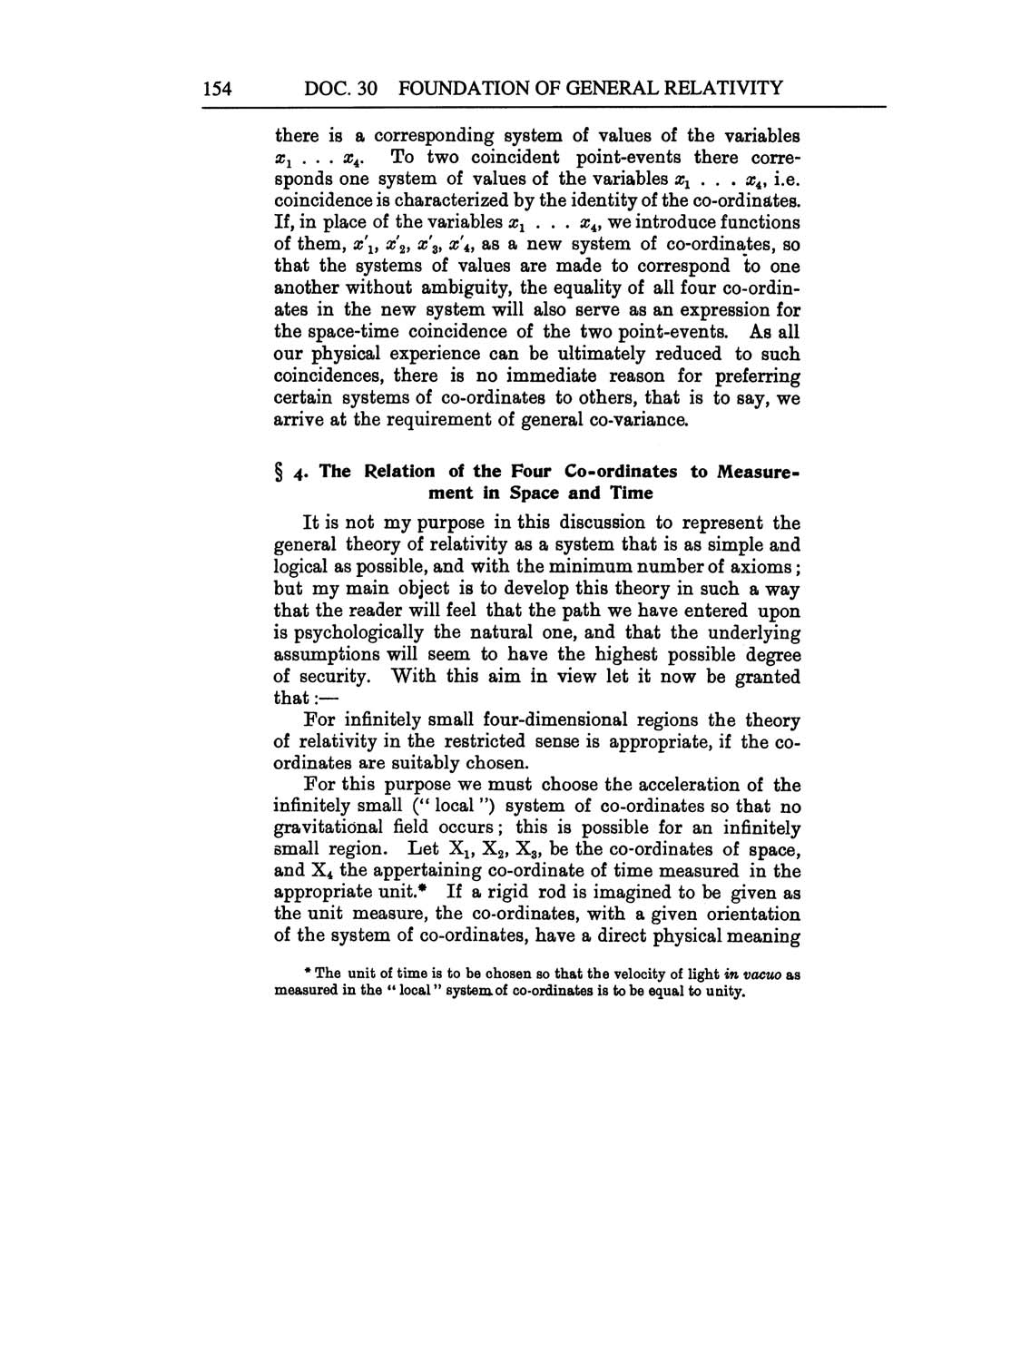 Volume 6: The Berlin Years: Writings, 1914-1917 (English translation supplement) page 154